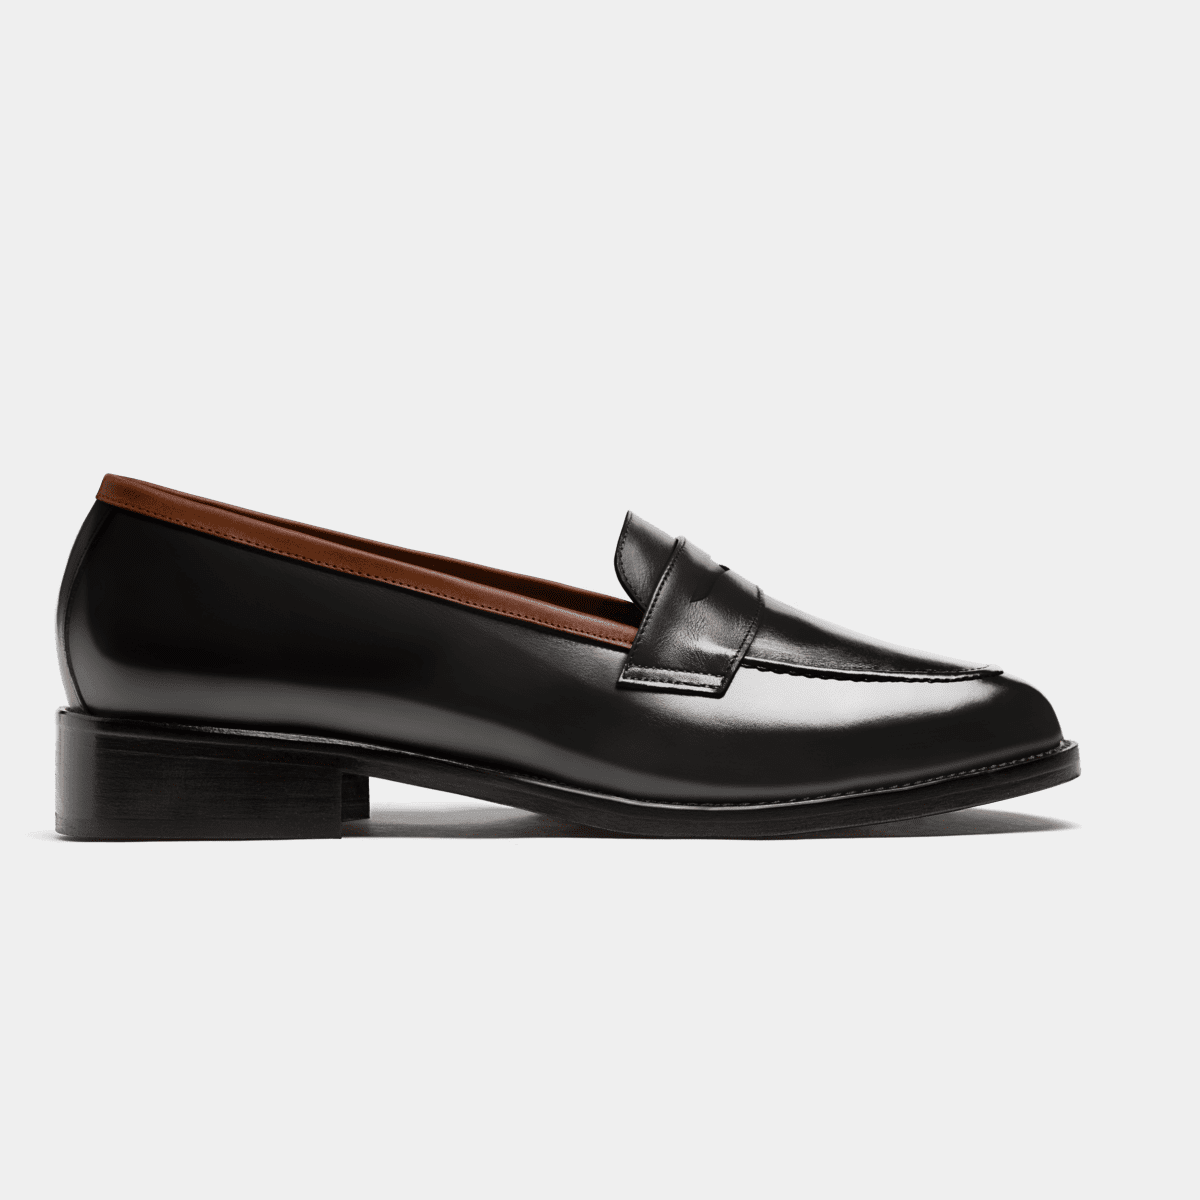 Penny Loafer - black flora leather | Sumissura